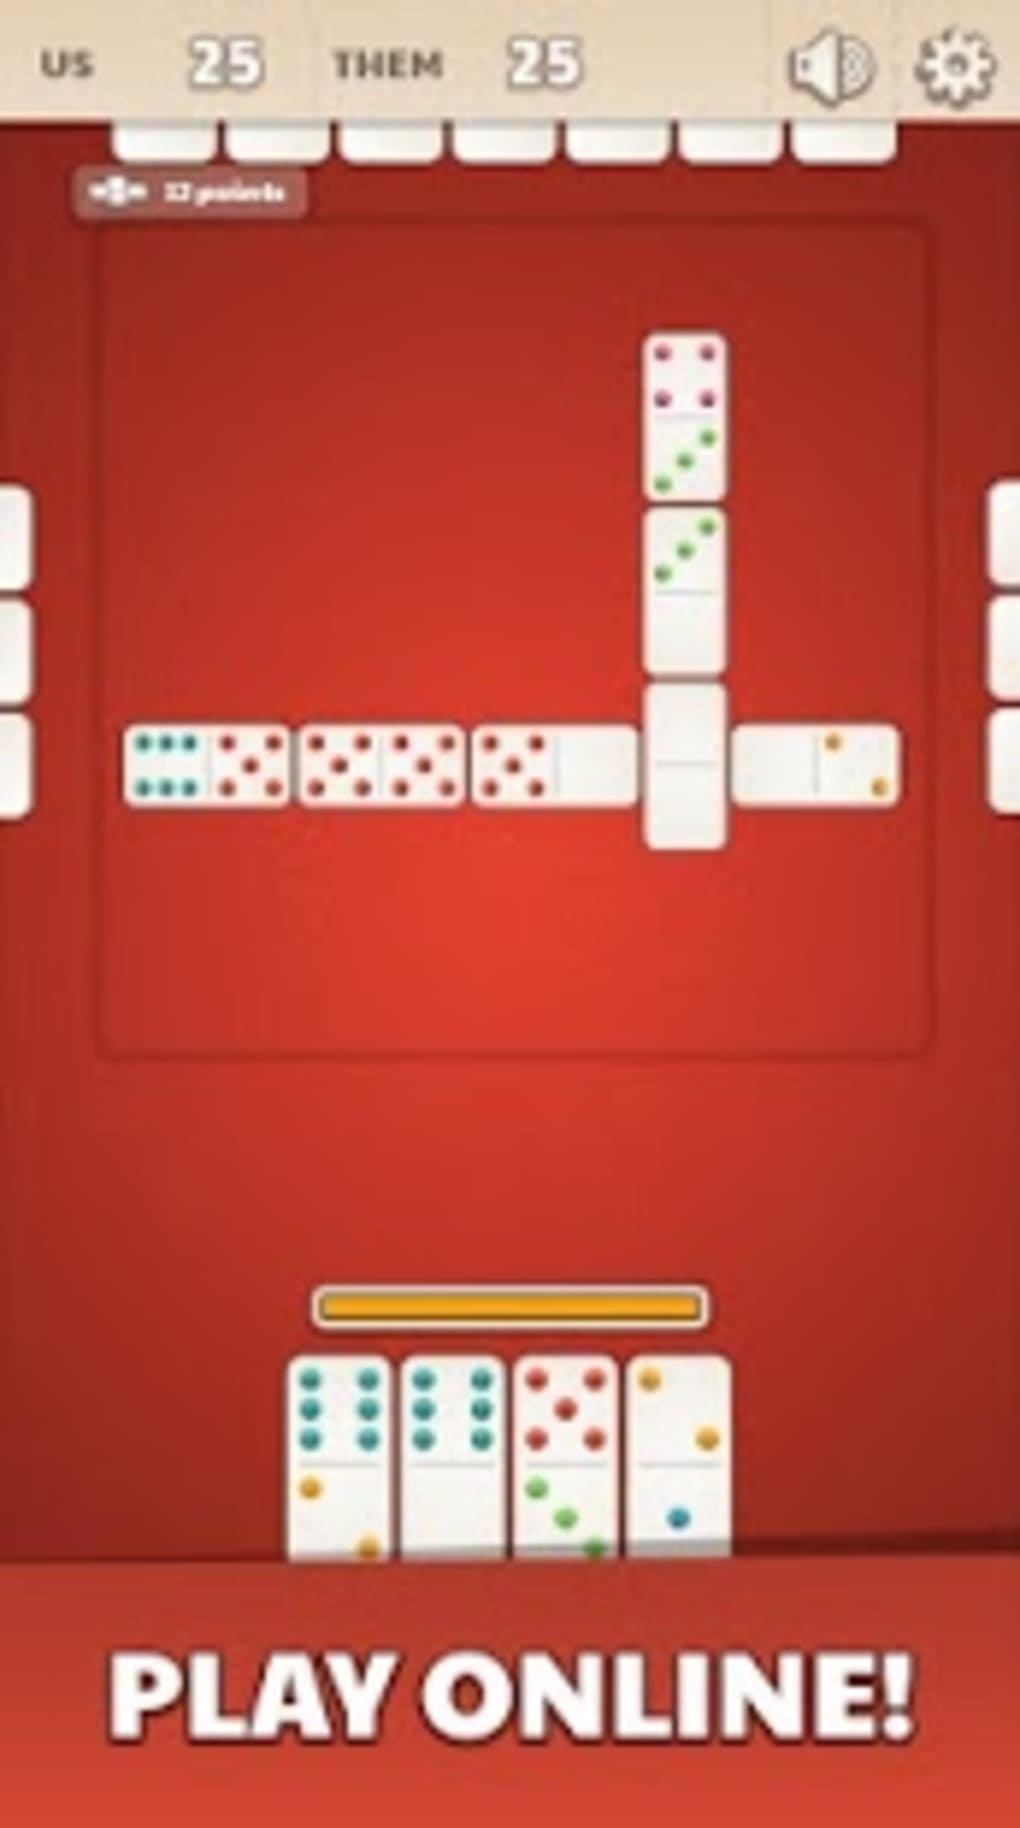 Dominos Online Jogatina: Game for Android - Free App Download